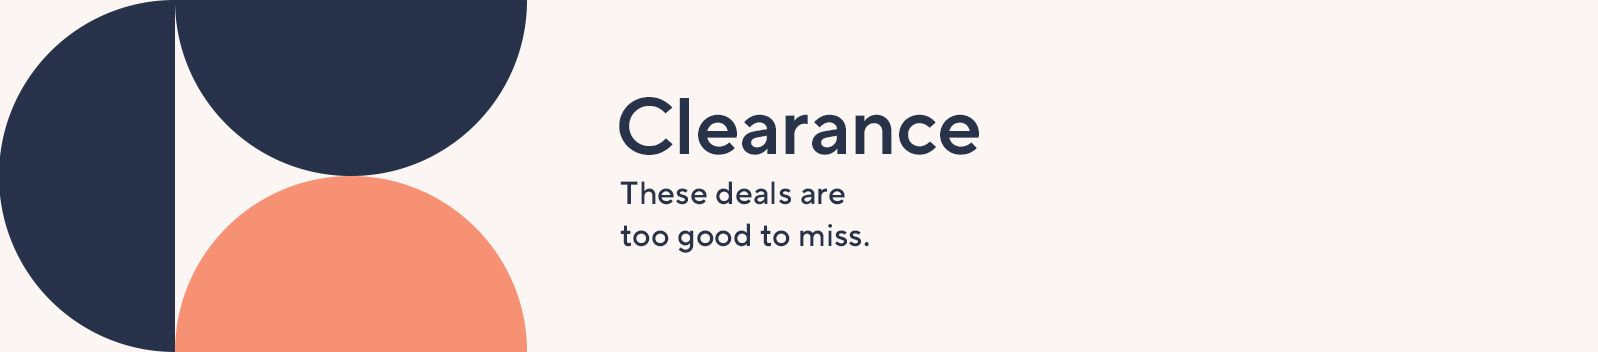 Clearance: These deals are too good to miss.